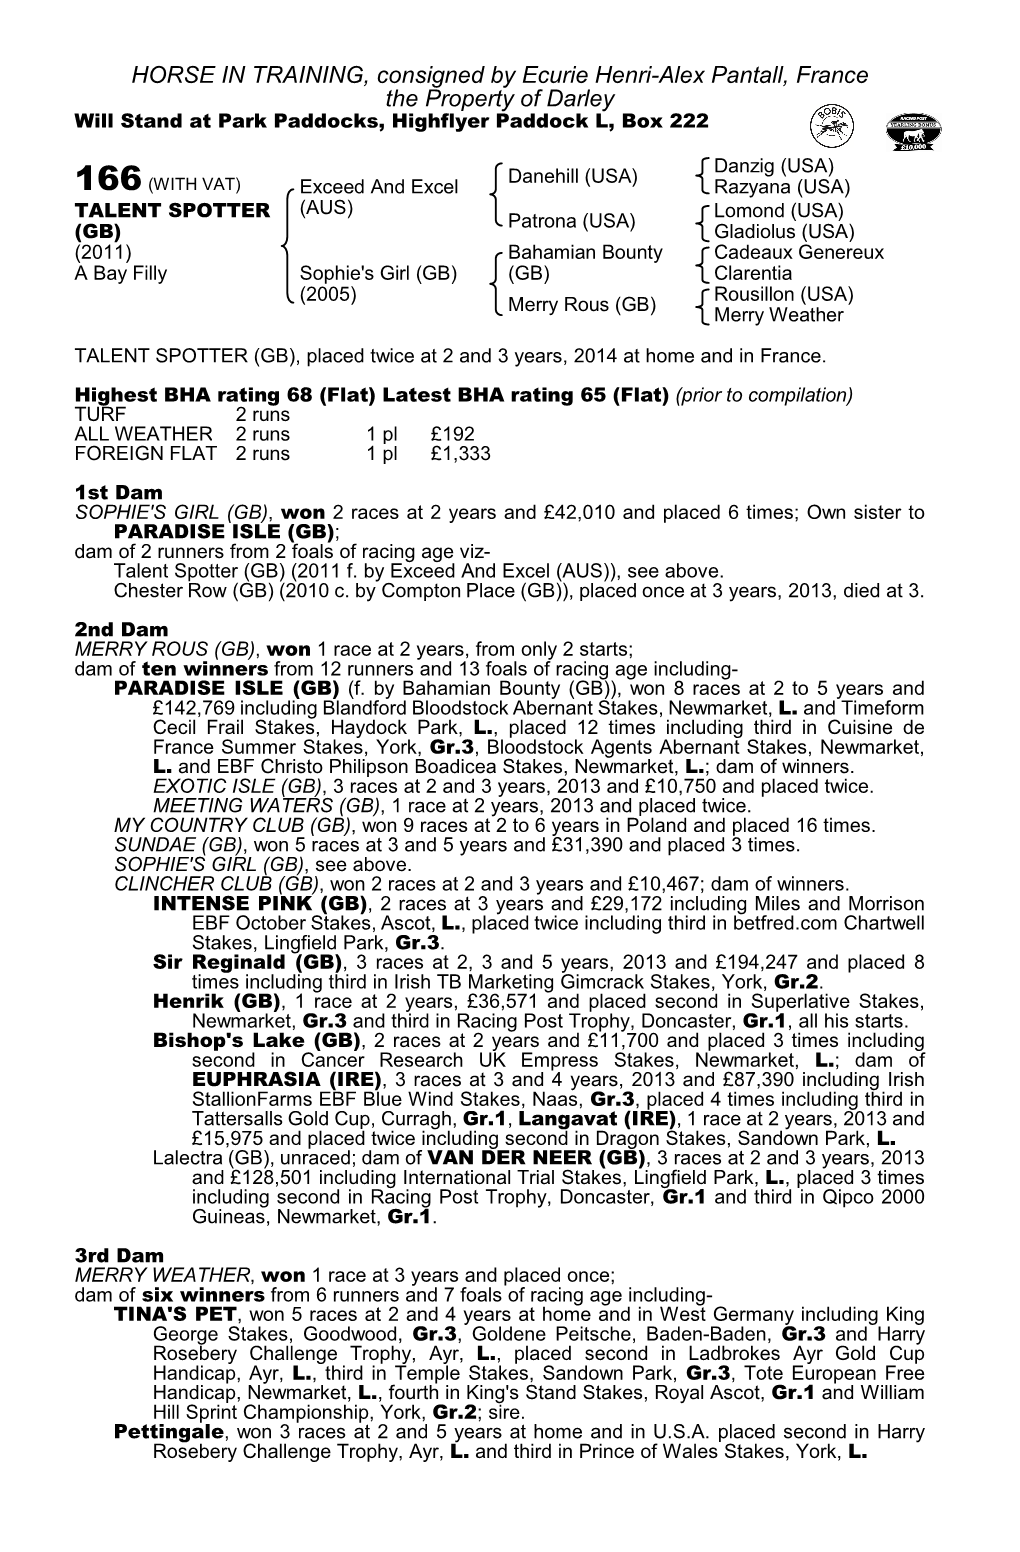 HORSE in TRAINING, Consigned by Ecurie Henri-Alex Pantall, France the Property of Darley Will Stand at Park Paddocks, Highflyer Paddock L, Box 222